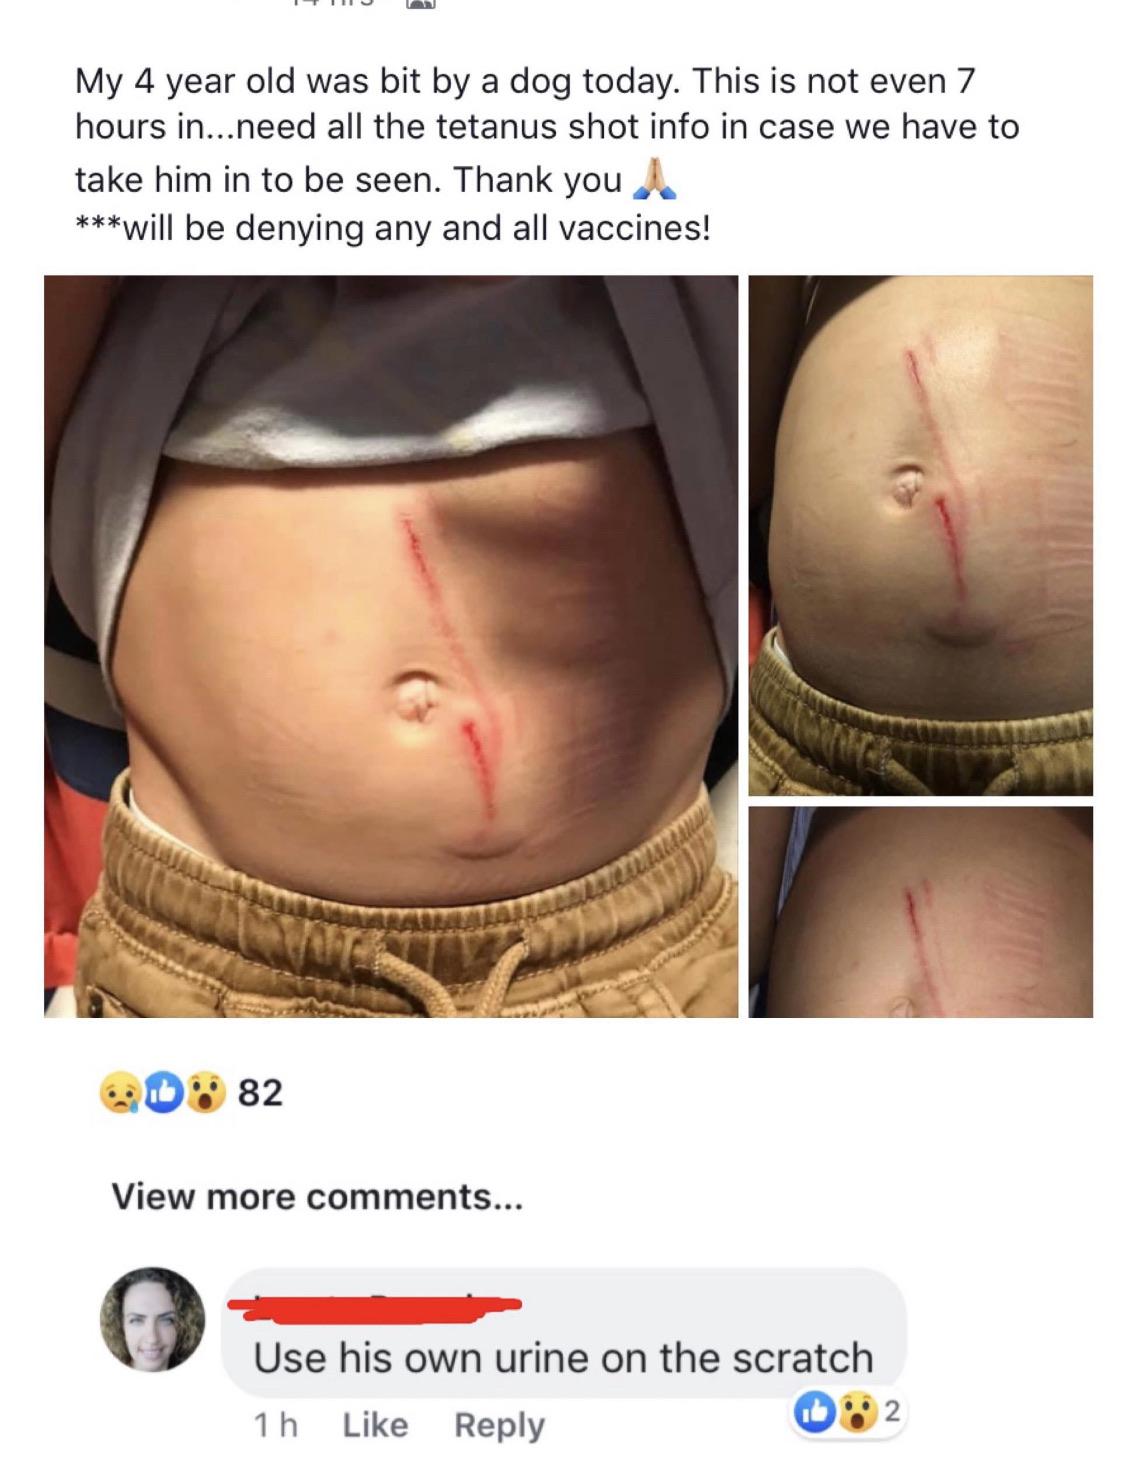 abdomen - My 4 year old was bit by a dog today. This is not even 7 hours in...need all the tetanus shot info in case we have to take him in to be seen. Thank you will be denying any and all vaccines! 082 View more ... Use his own urine on the scratch 1h 2